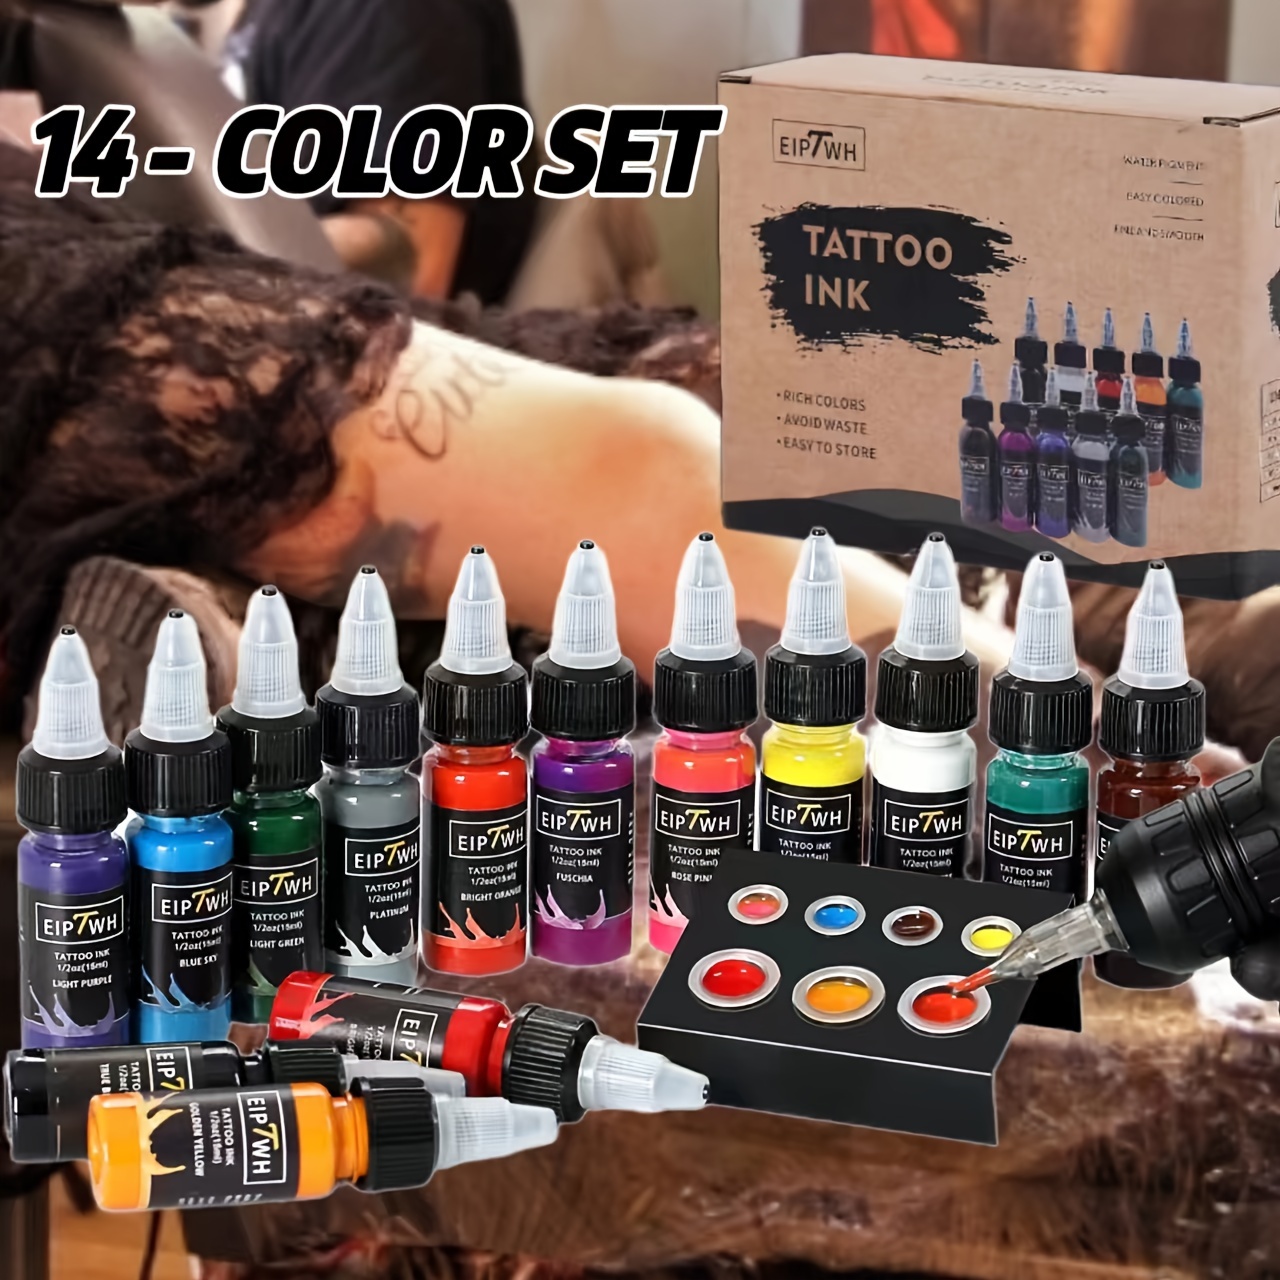 Intenze Tattoo Ink Supplies Color Lining Kit 10 Unique Colors Professional  Quality, 1 Ounce Bottles, Set of 10